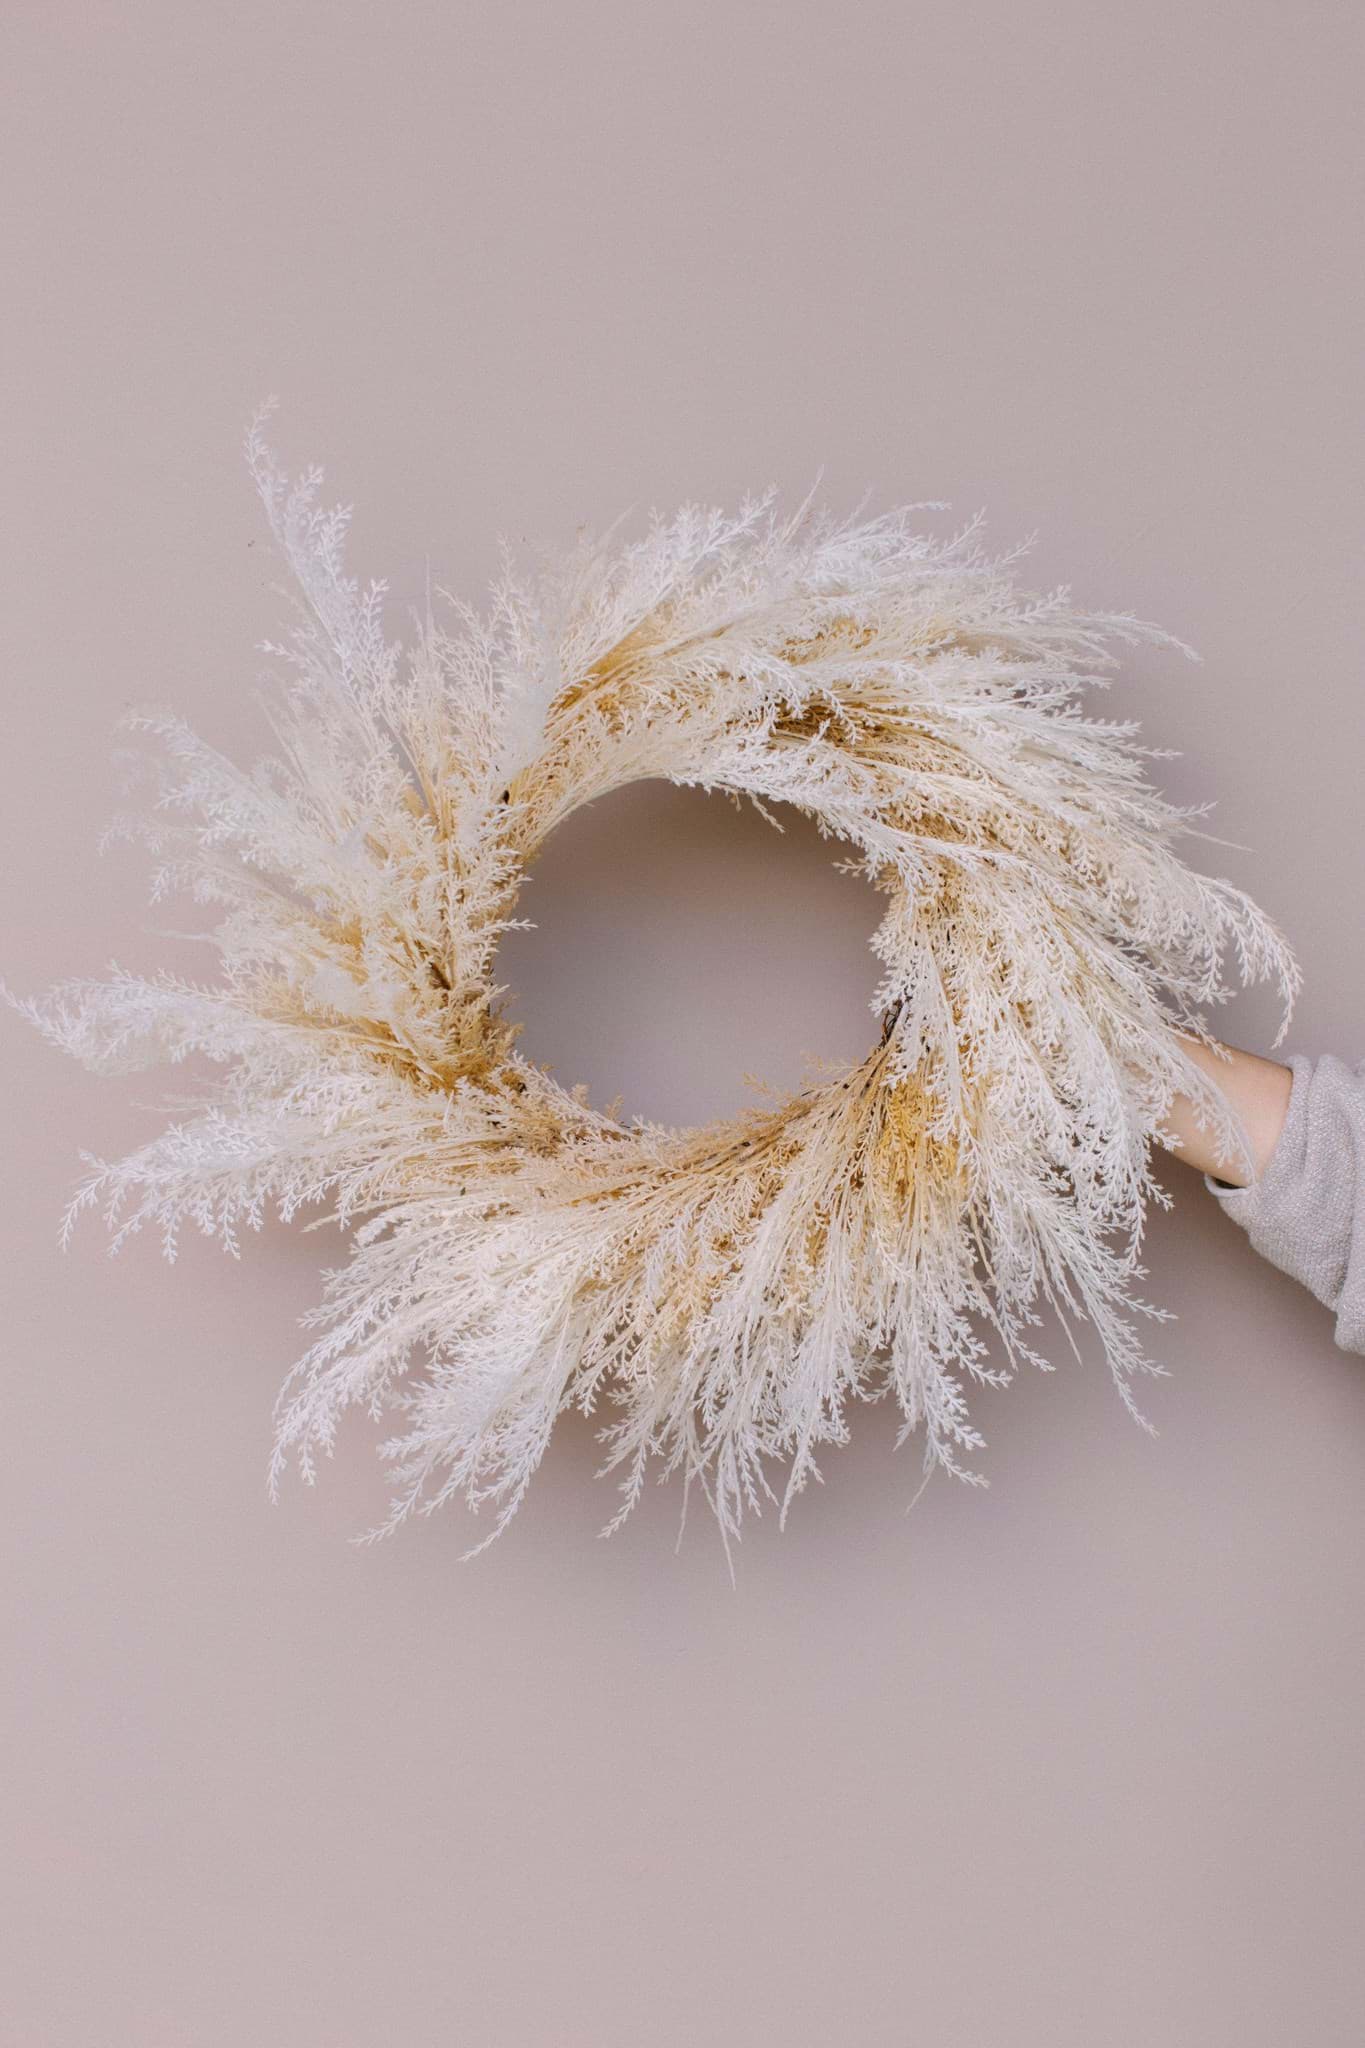 Events Decor and Eye Catching for All The Seasons ONECIRCLE Pampas Grass Wreath,22-24 Pampas Wreath for Front Doors,Boho Wreath Home Decor,Farmhouse Decor 